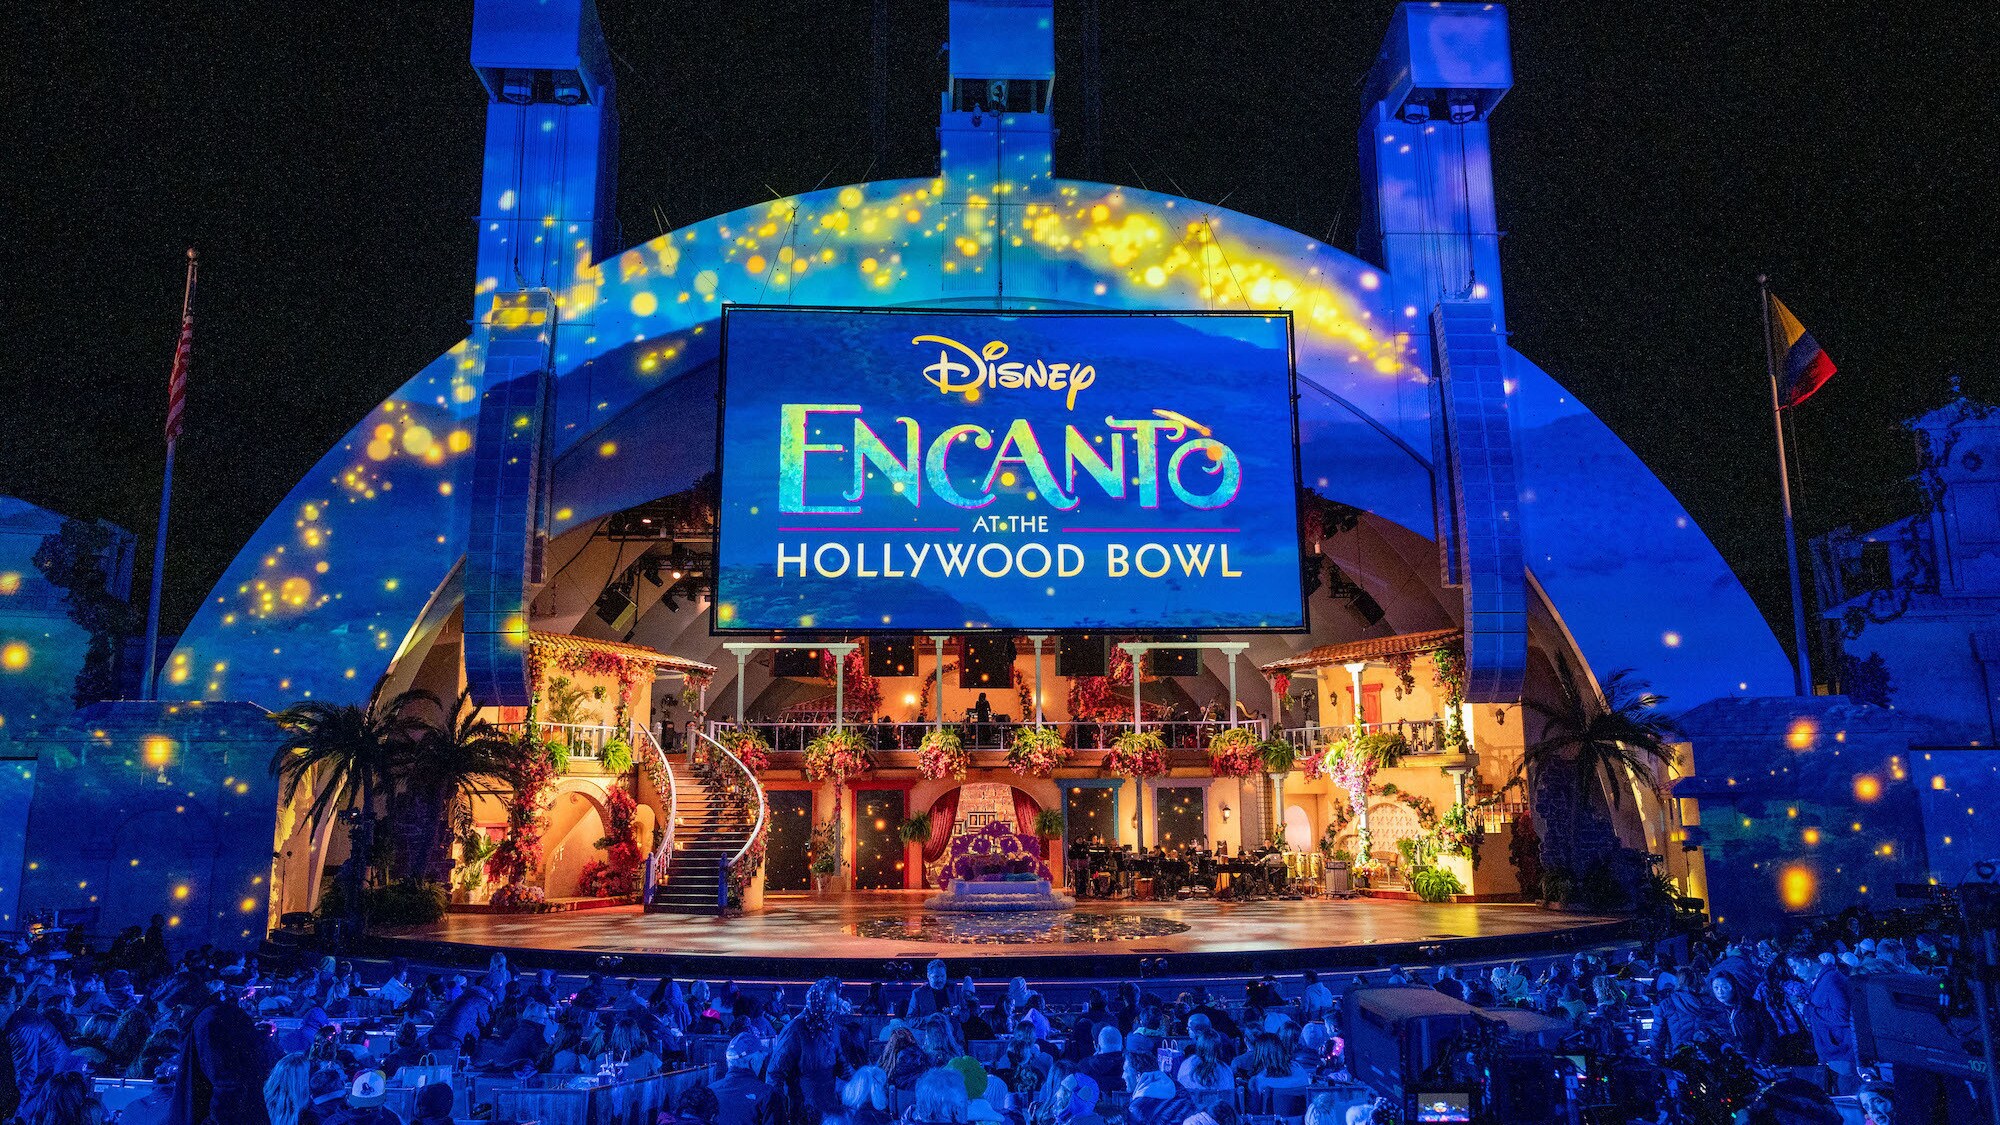 The live-to-film concert experience Encanto at the Hollywood Bowl. Encanto at the Hollywood Bowl, from Disney Branded Television, will premiere on Dec. 28 only on Disney+. (Photo credit: Disney/Temma Hankin)